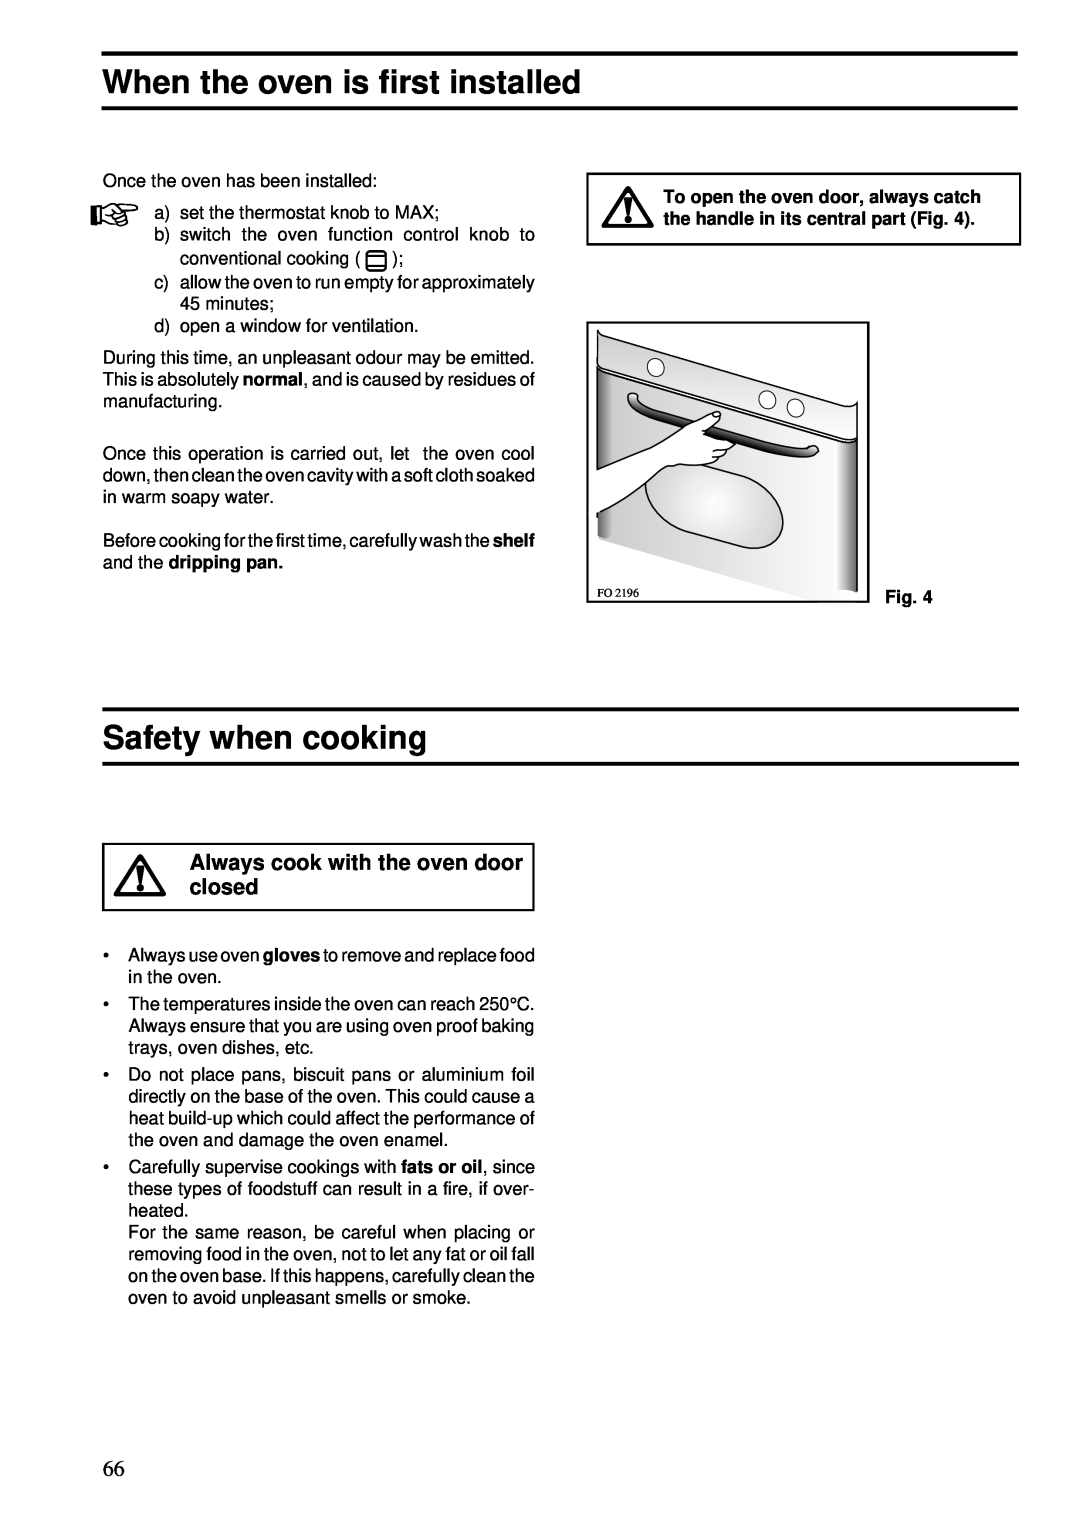 Zanussi ZBS 862 manual When the oven is first installed, Safety when cooking, Always cook with the oven door closed 